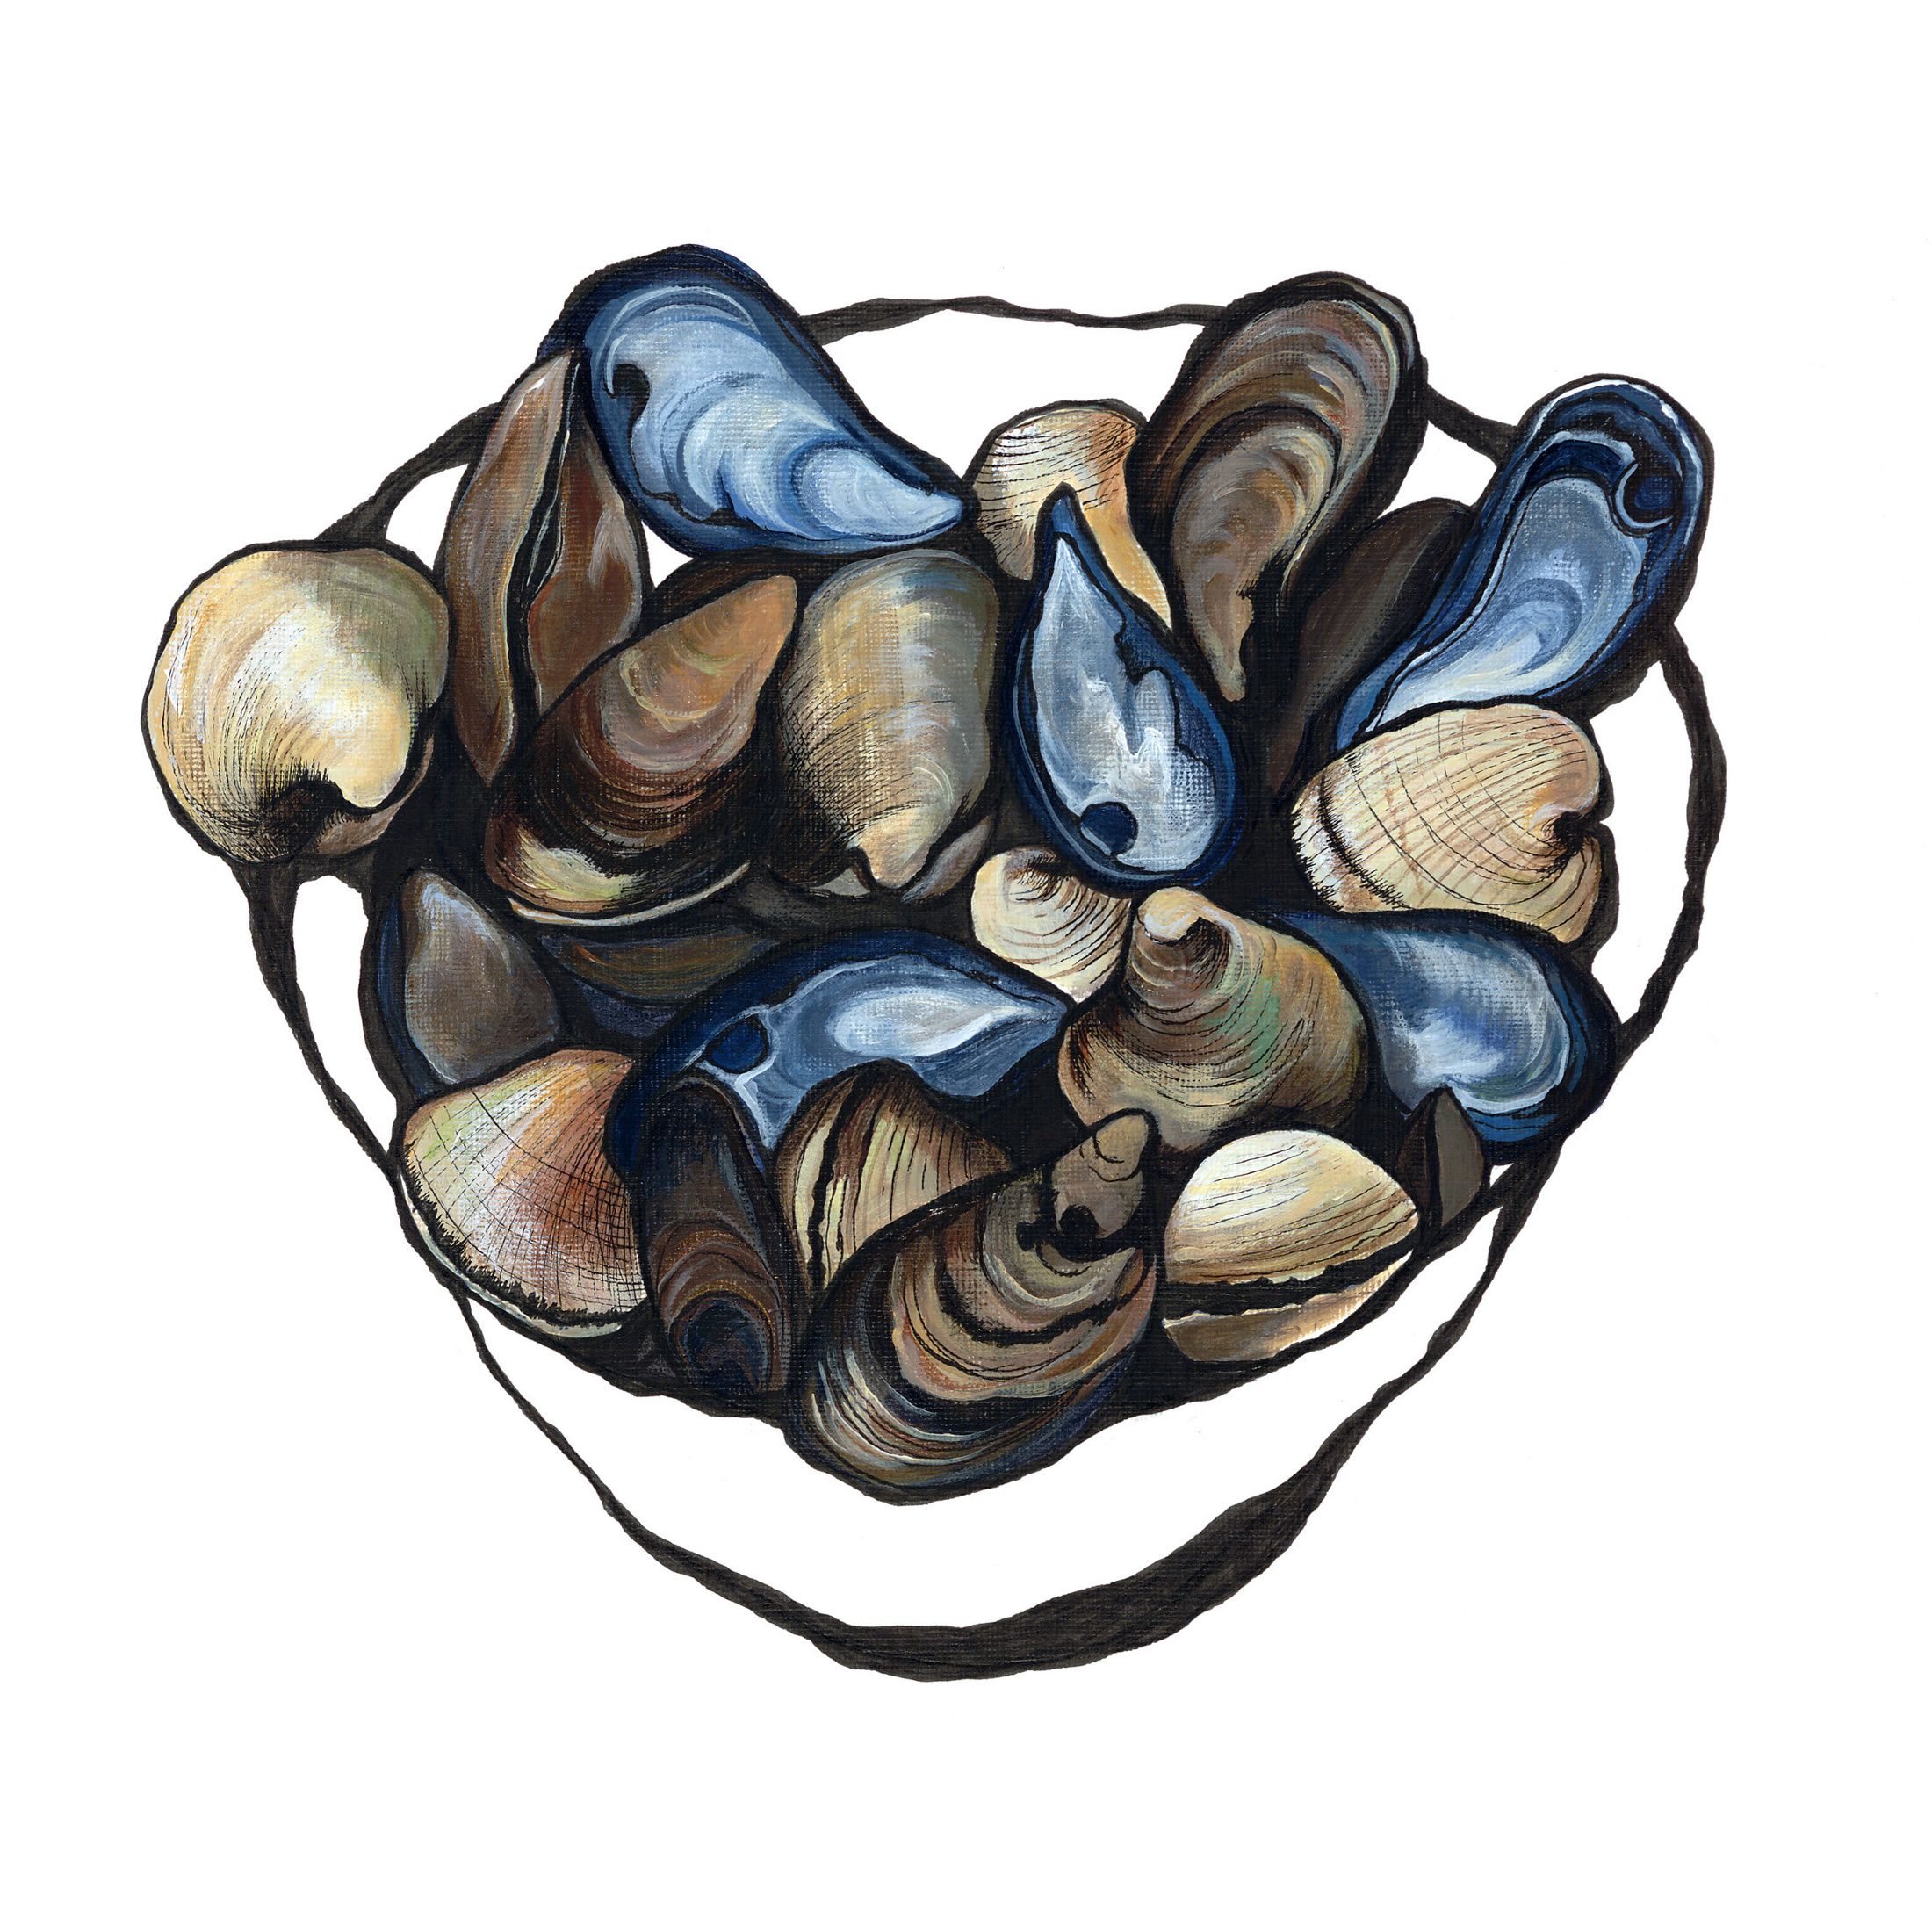 Mussels & Clams by Lucy Routh